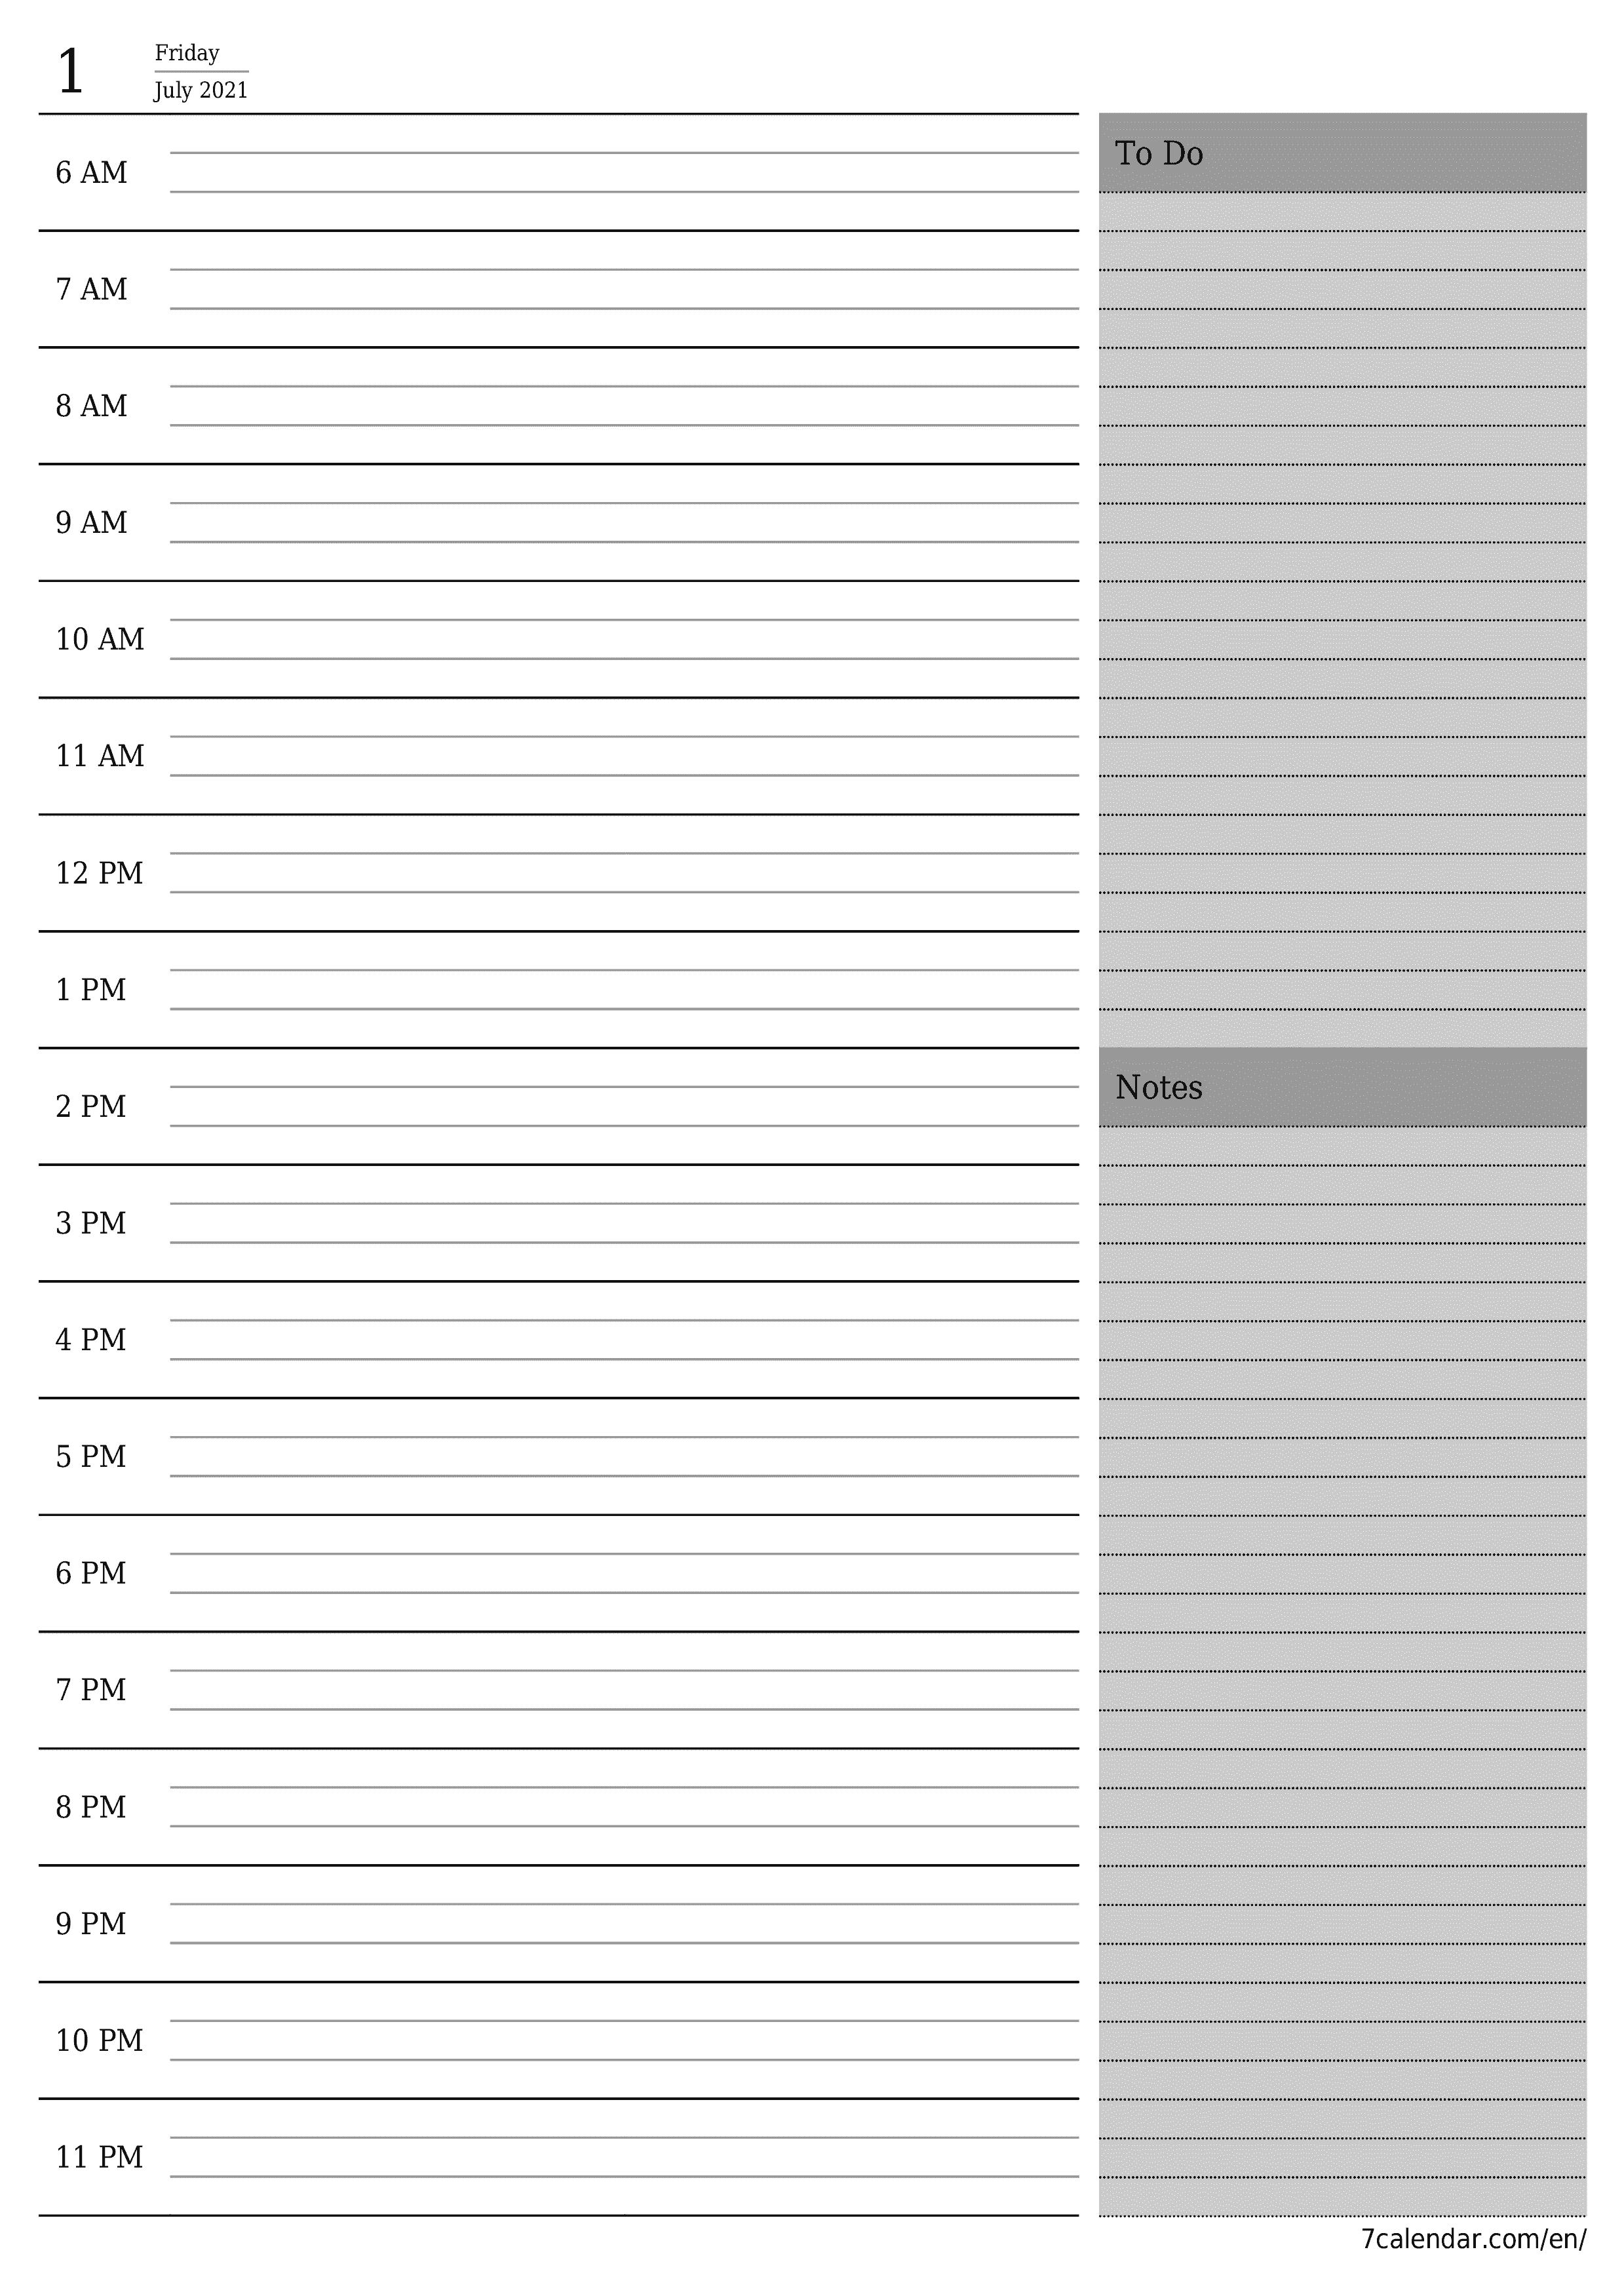 Blank daily calendar planner for day July 2021 with notes, save and print to PDF PNG English - 7calendar.com